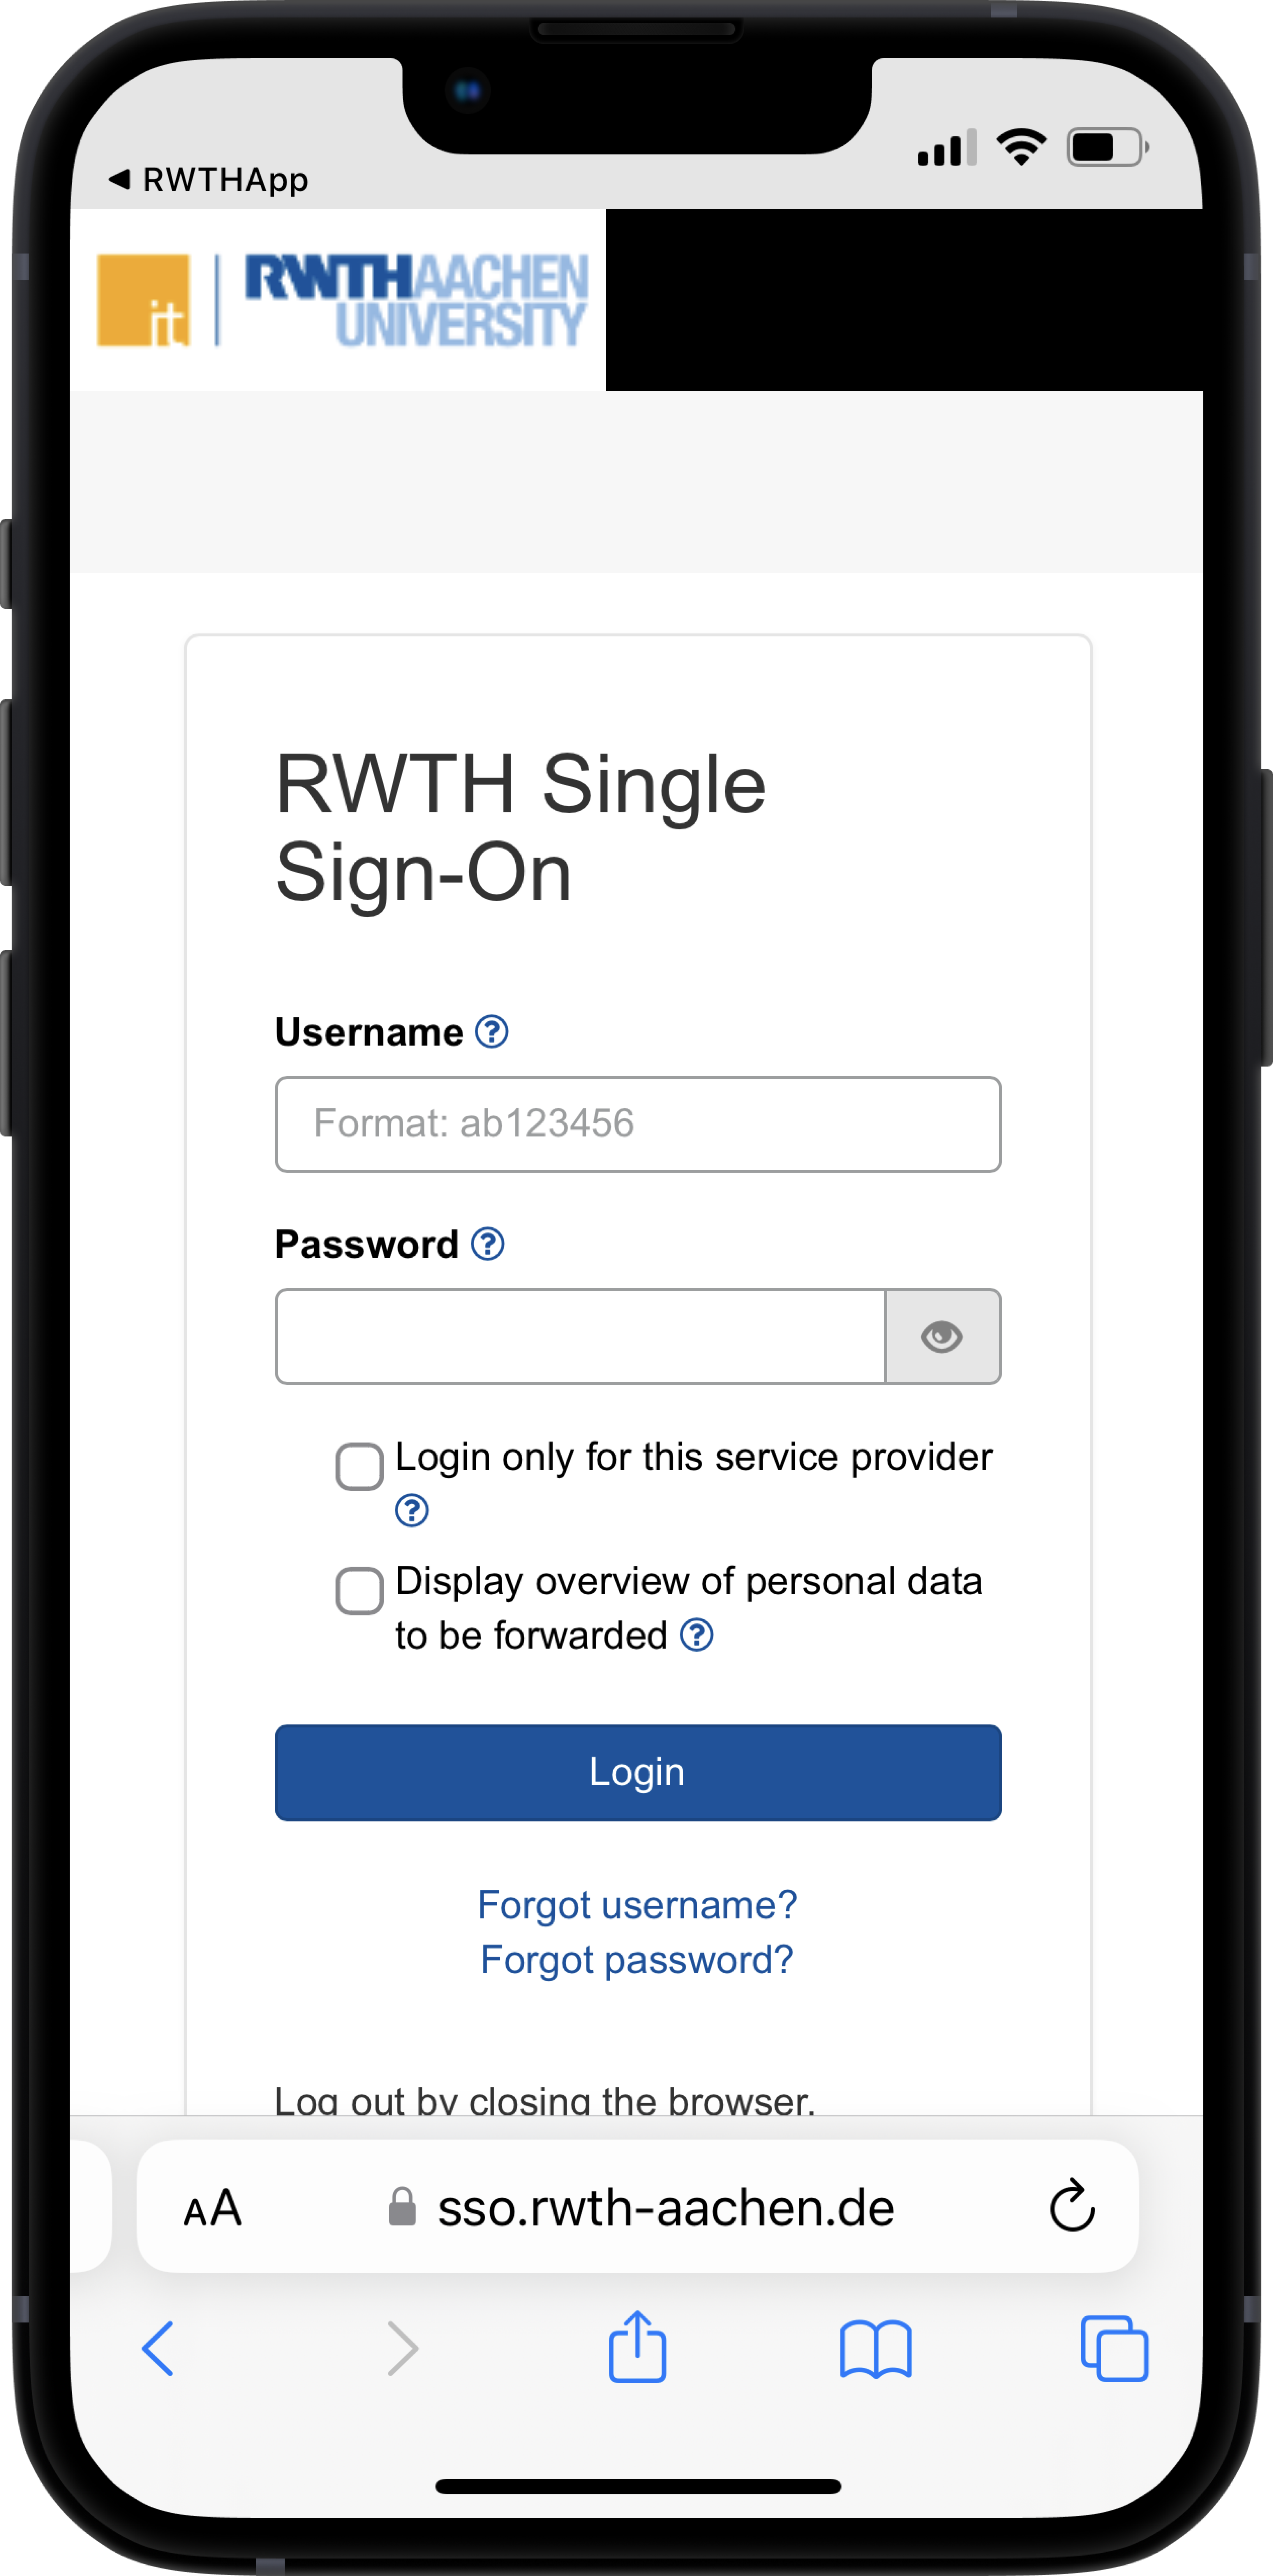 Logging in via the RWTH Single Sign-On